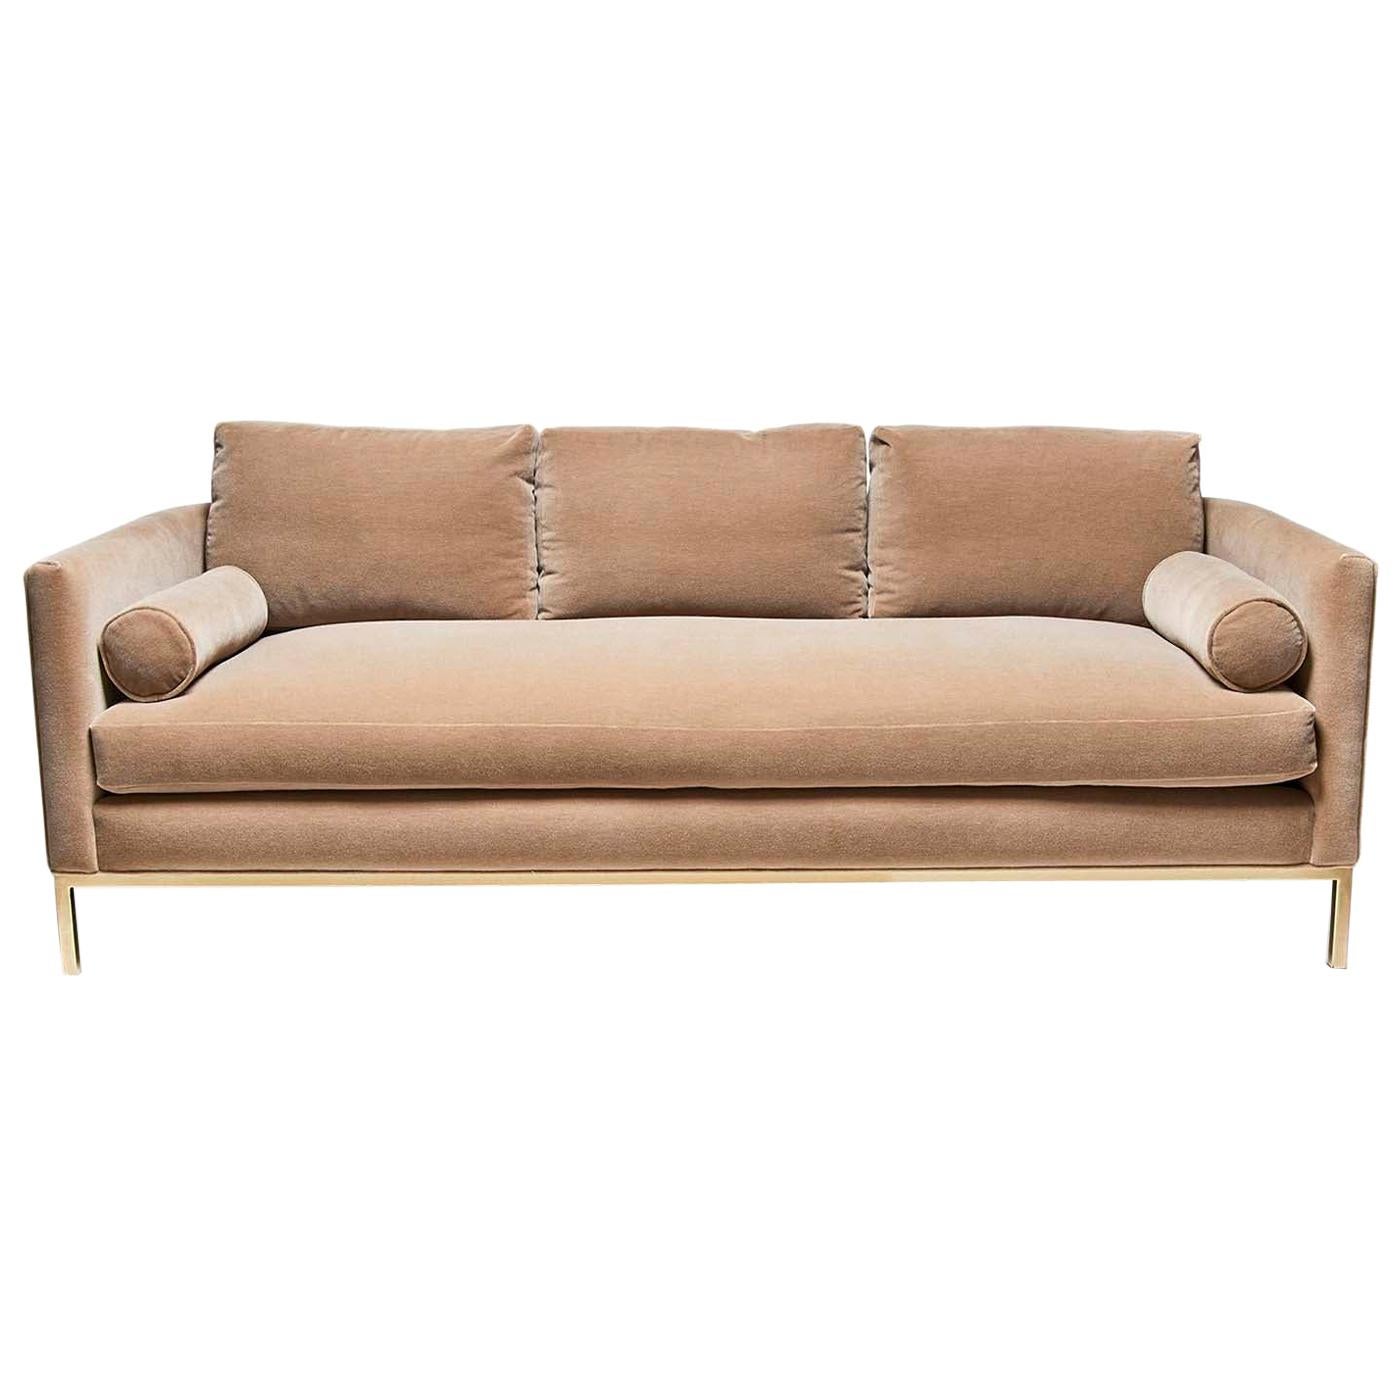 Mohair and Brass Curved Back Sofa by Lawson-Fenning For Sale at 1stDibs |  mohair sofa, mohair couch, mohair furniture